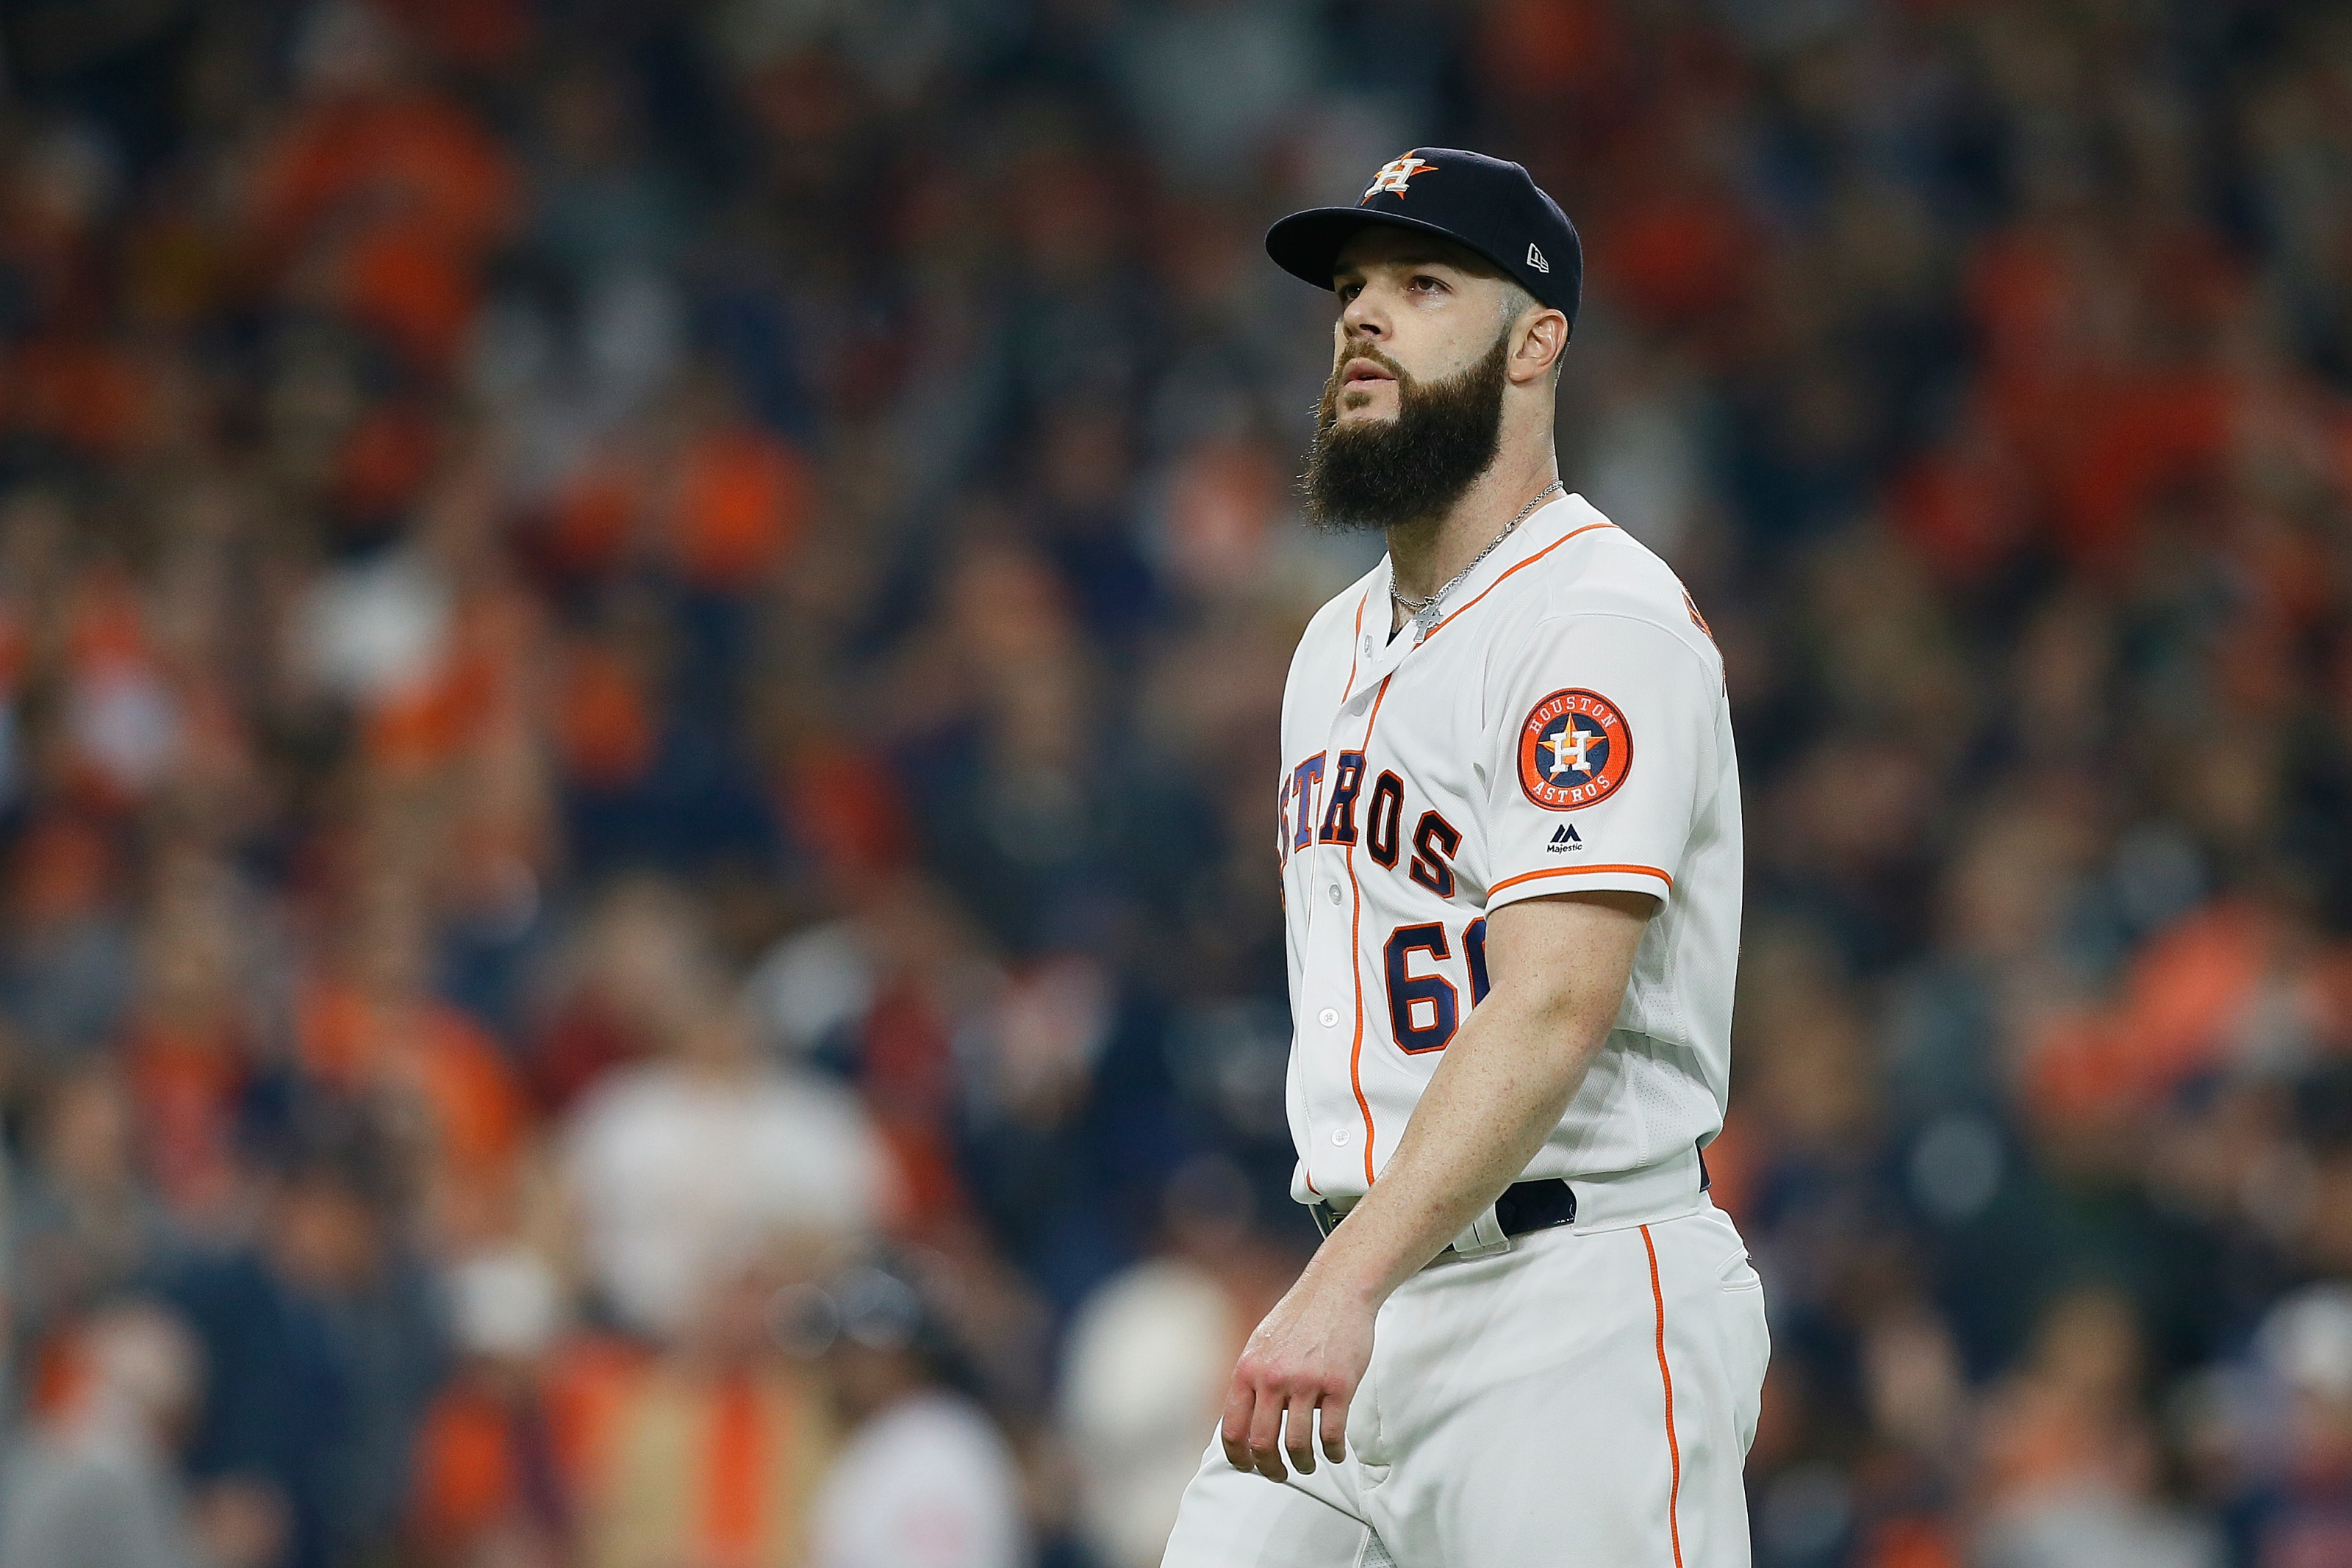 Houston Astros: Roster move begs the question, can the team improve?